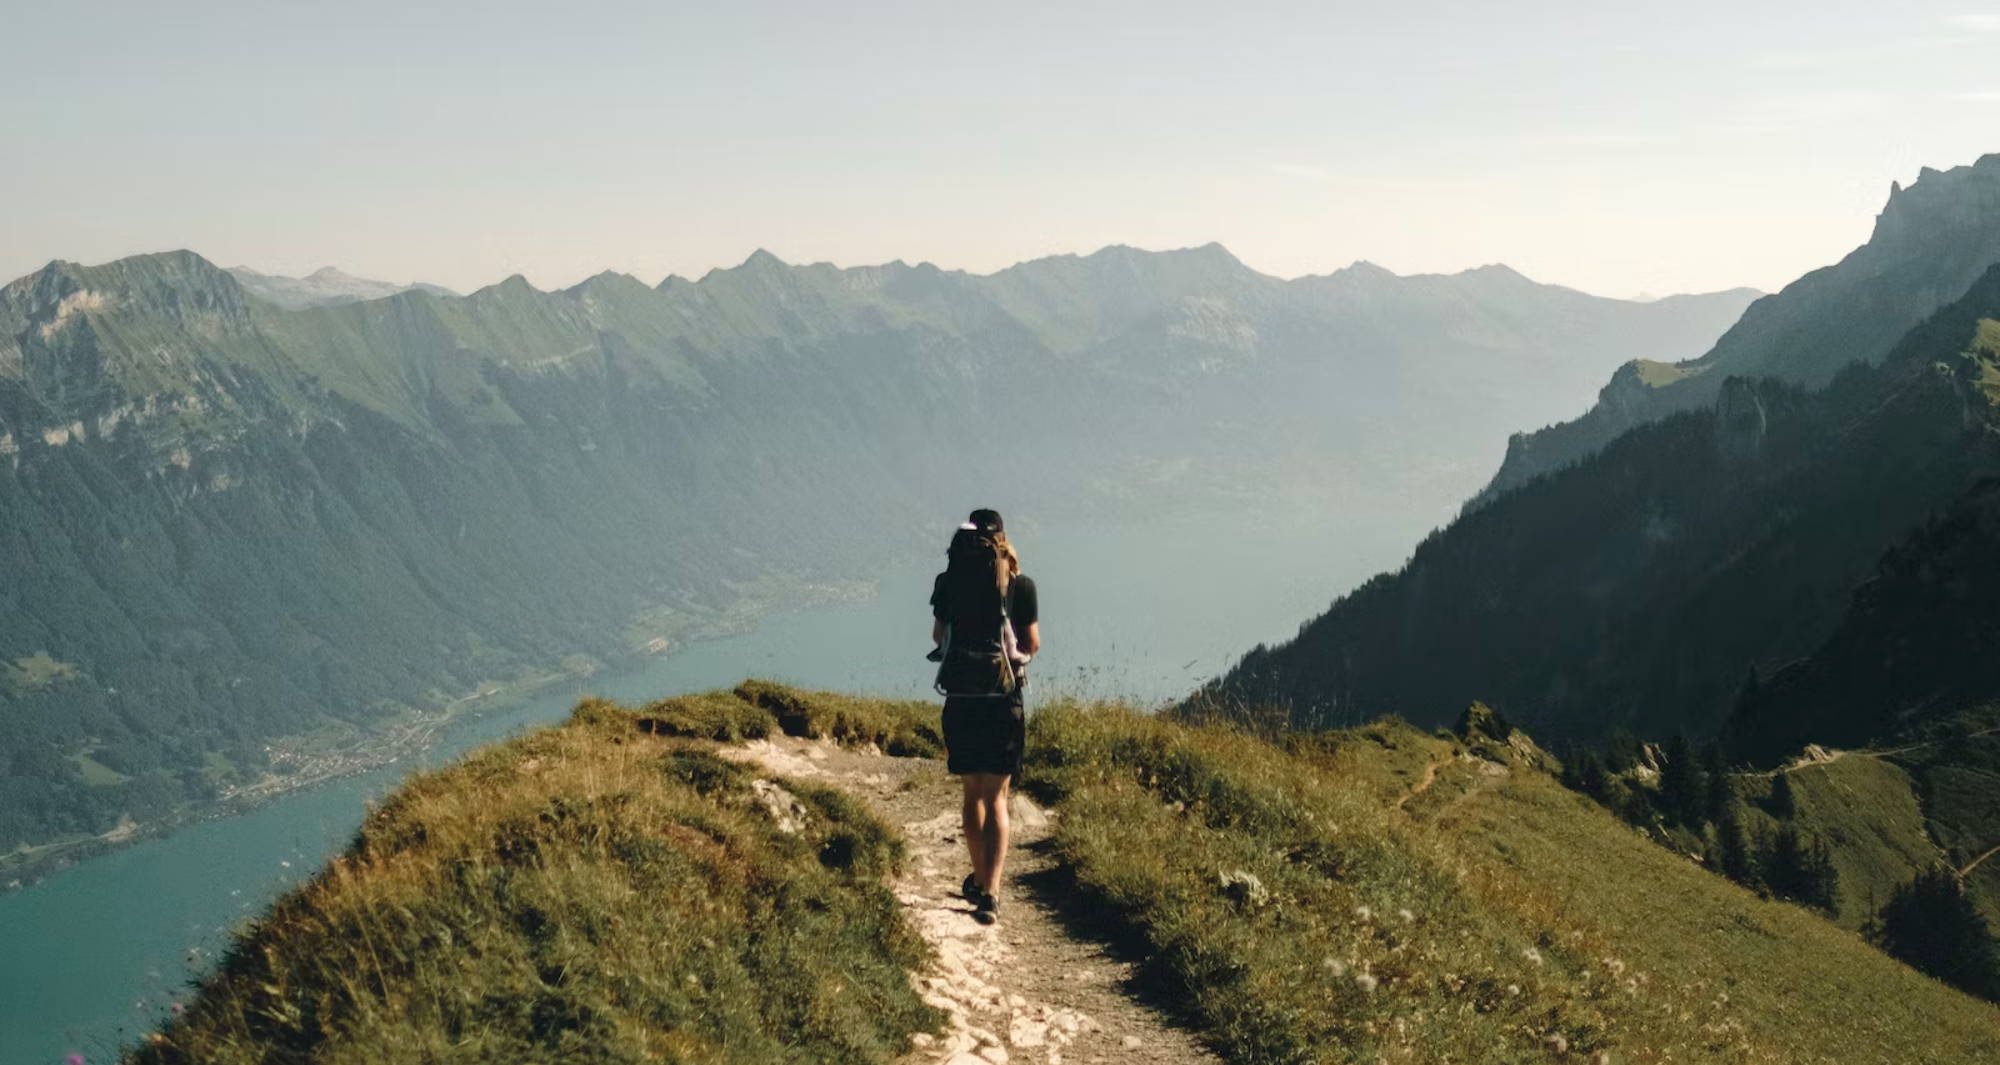  a person hiking on a thin path high above a laken surrounded by mountains